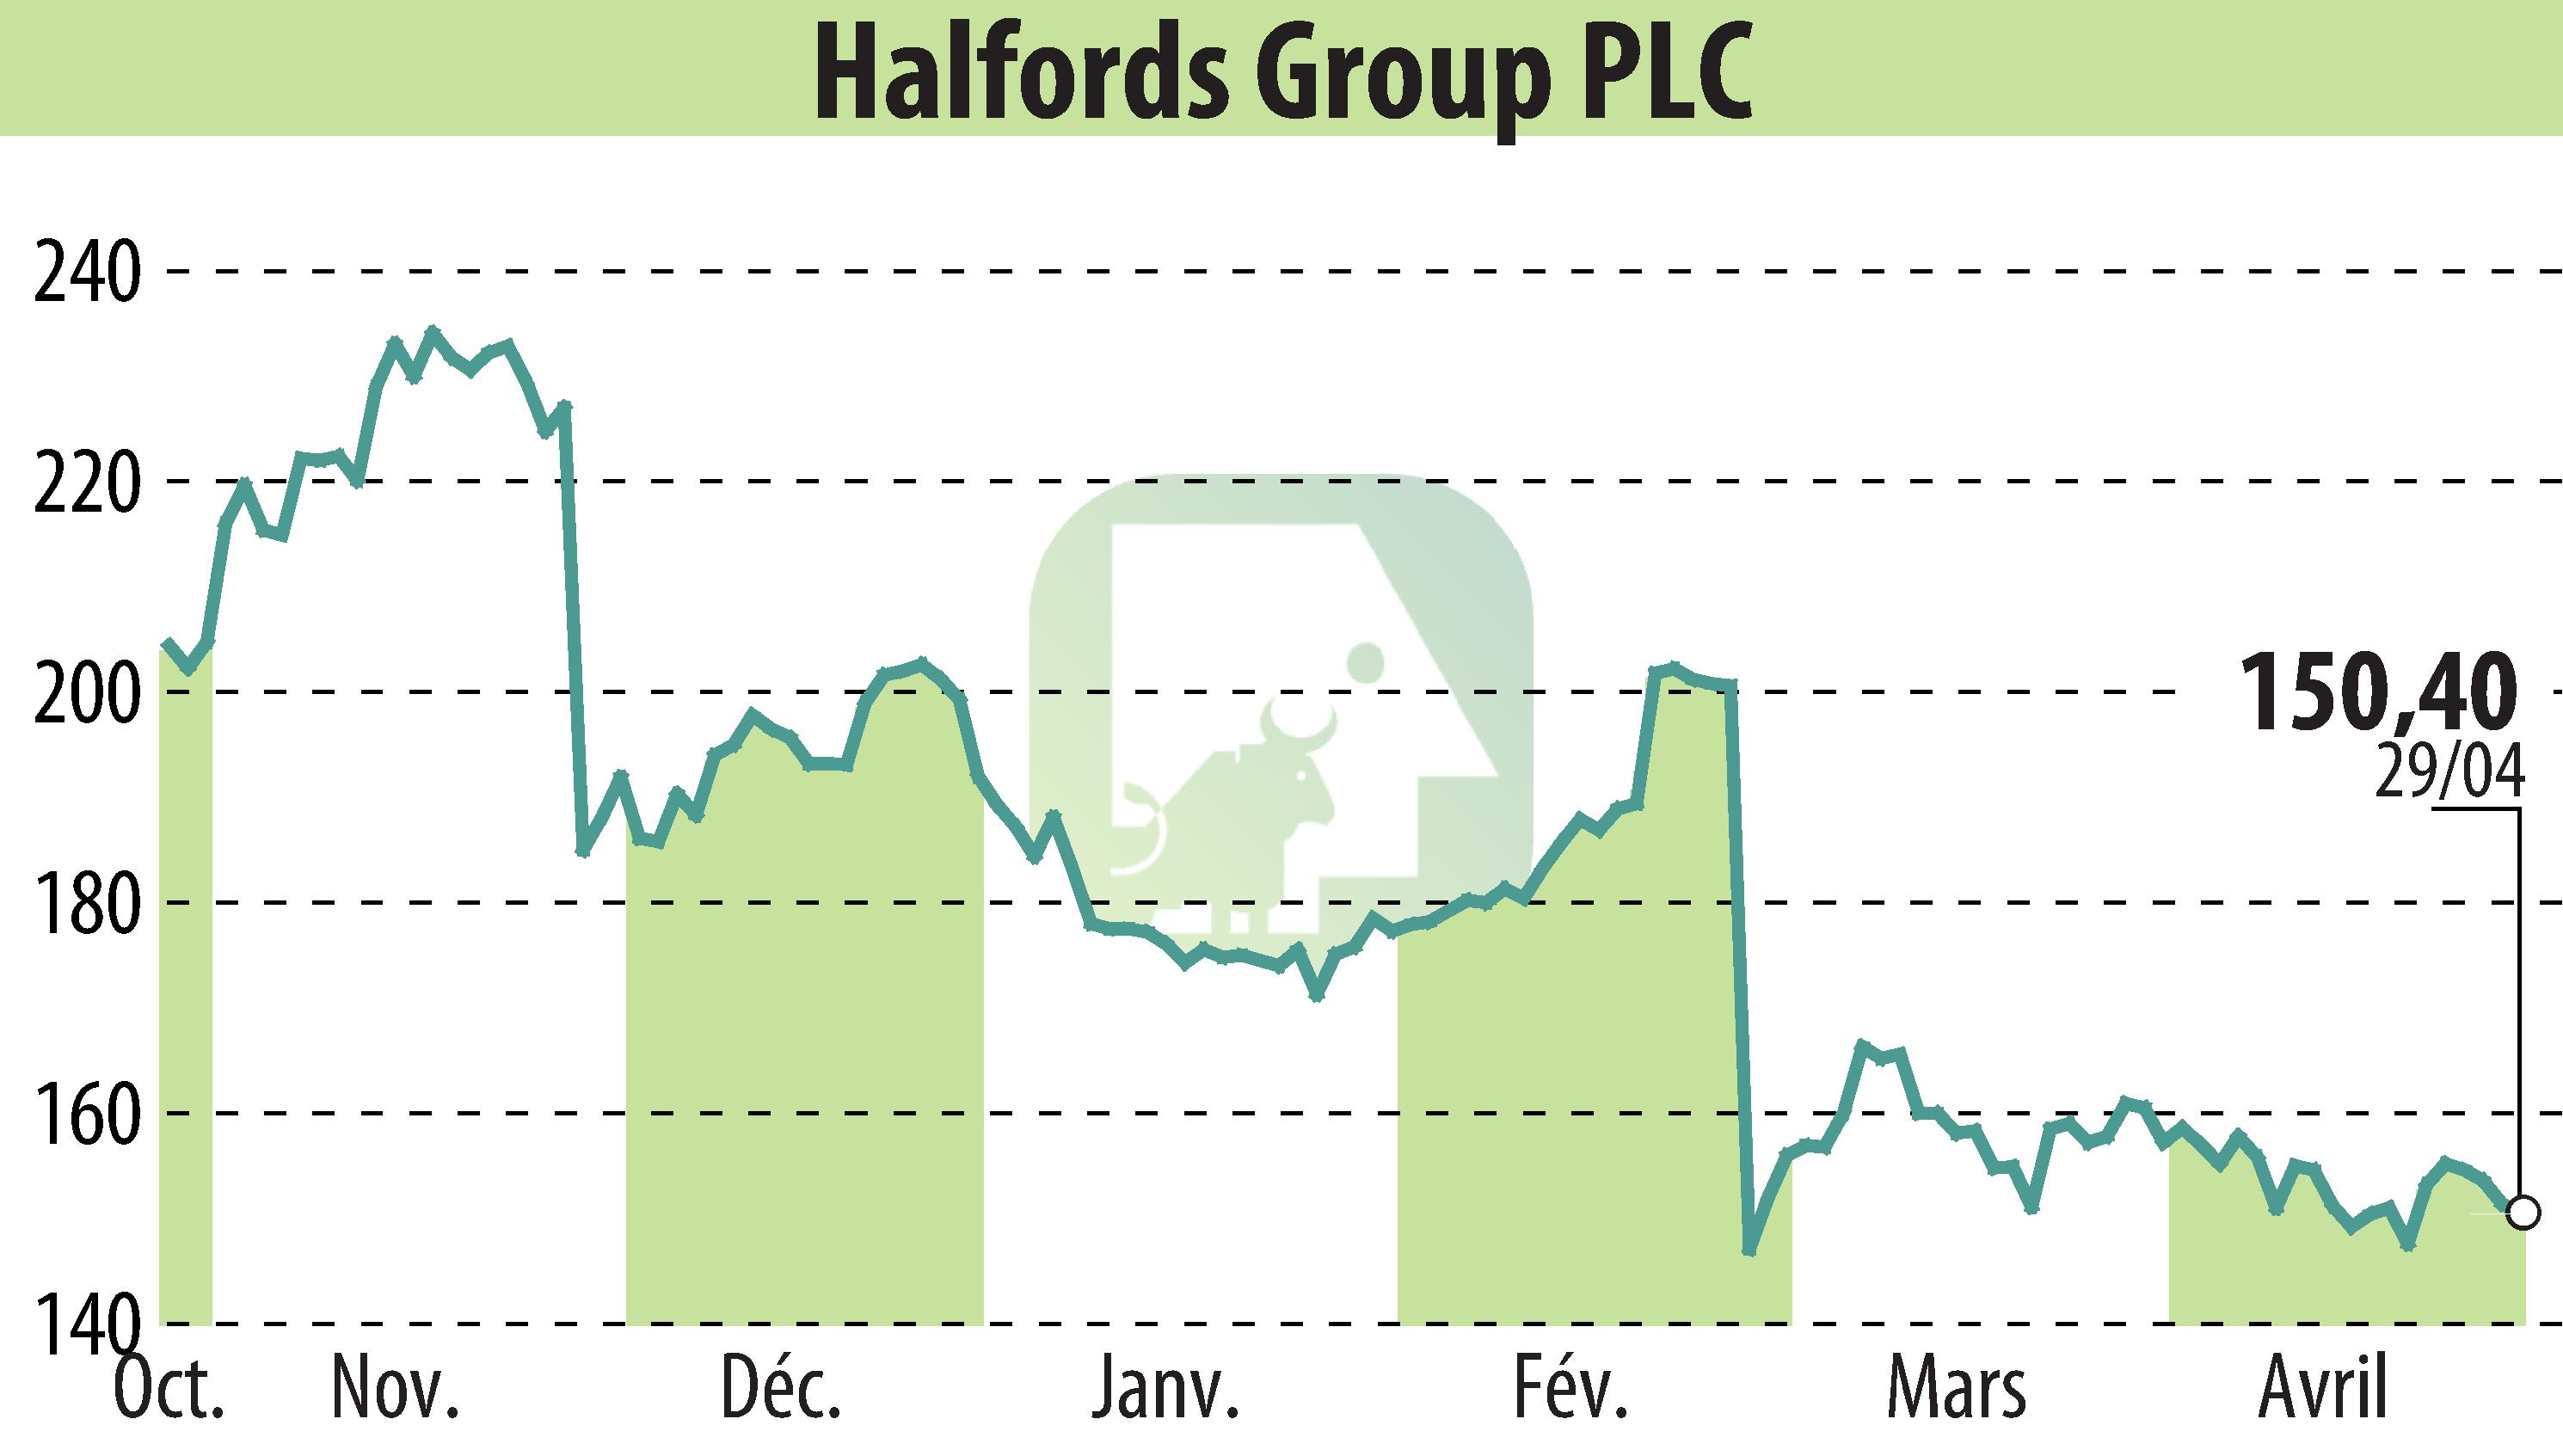 Stock price chart of Halfords (EBR:HFD) showing fluctuations.